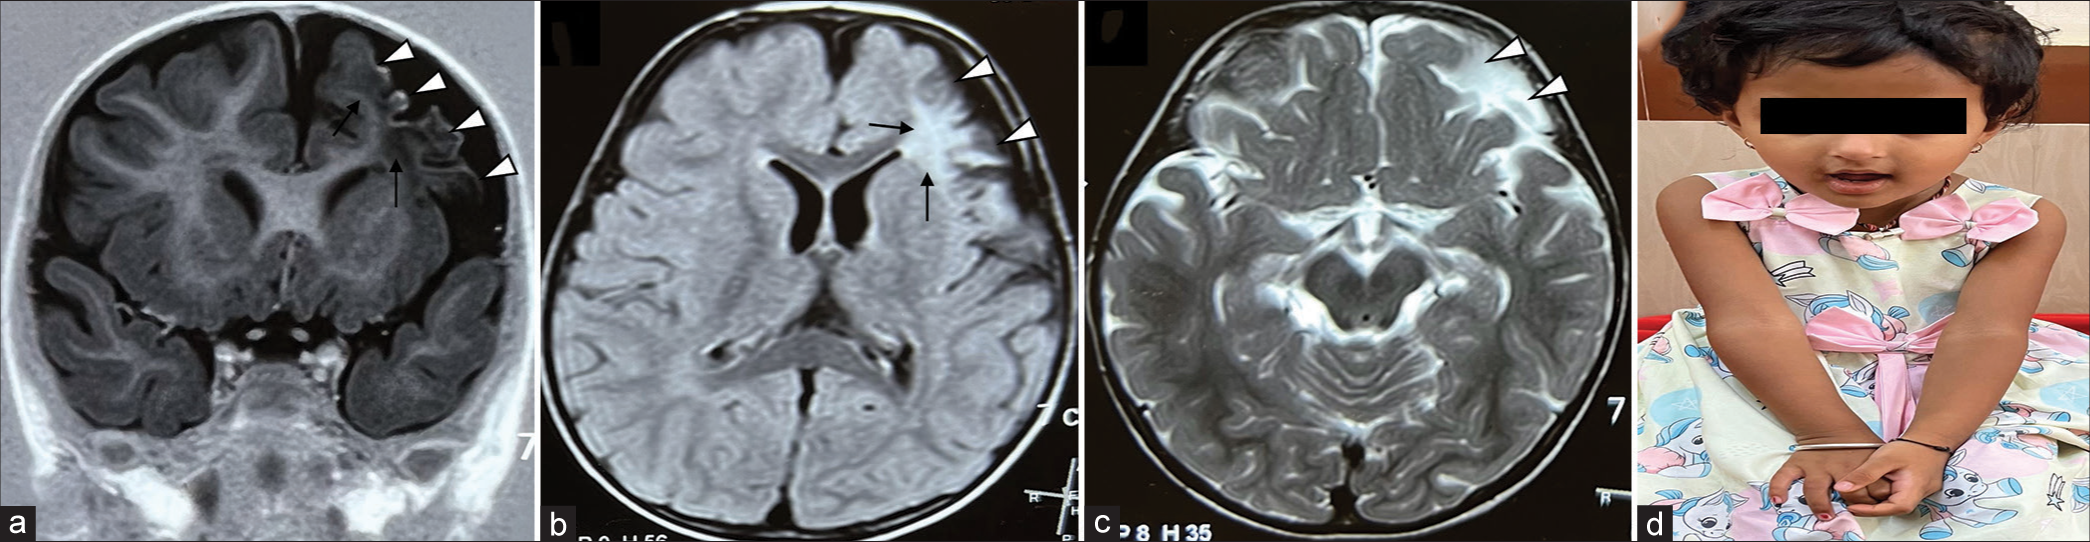 (a) Magnetic resonance imaging brain with T1-weighted coronal (white arrow heads), (b) T2-weighted axial (white arrow heads) and (c) short tau inversion recovery axial sequences show loss of left frontal lobe volume (white arrow heads) with gliotic ischaemic areas (thin black arrows) in cortex and subcortical white matter regions, (d) Clinical photograph of the child during the last follow-up at three years showing mild residual weakness of the right upper limb.